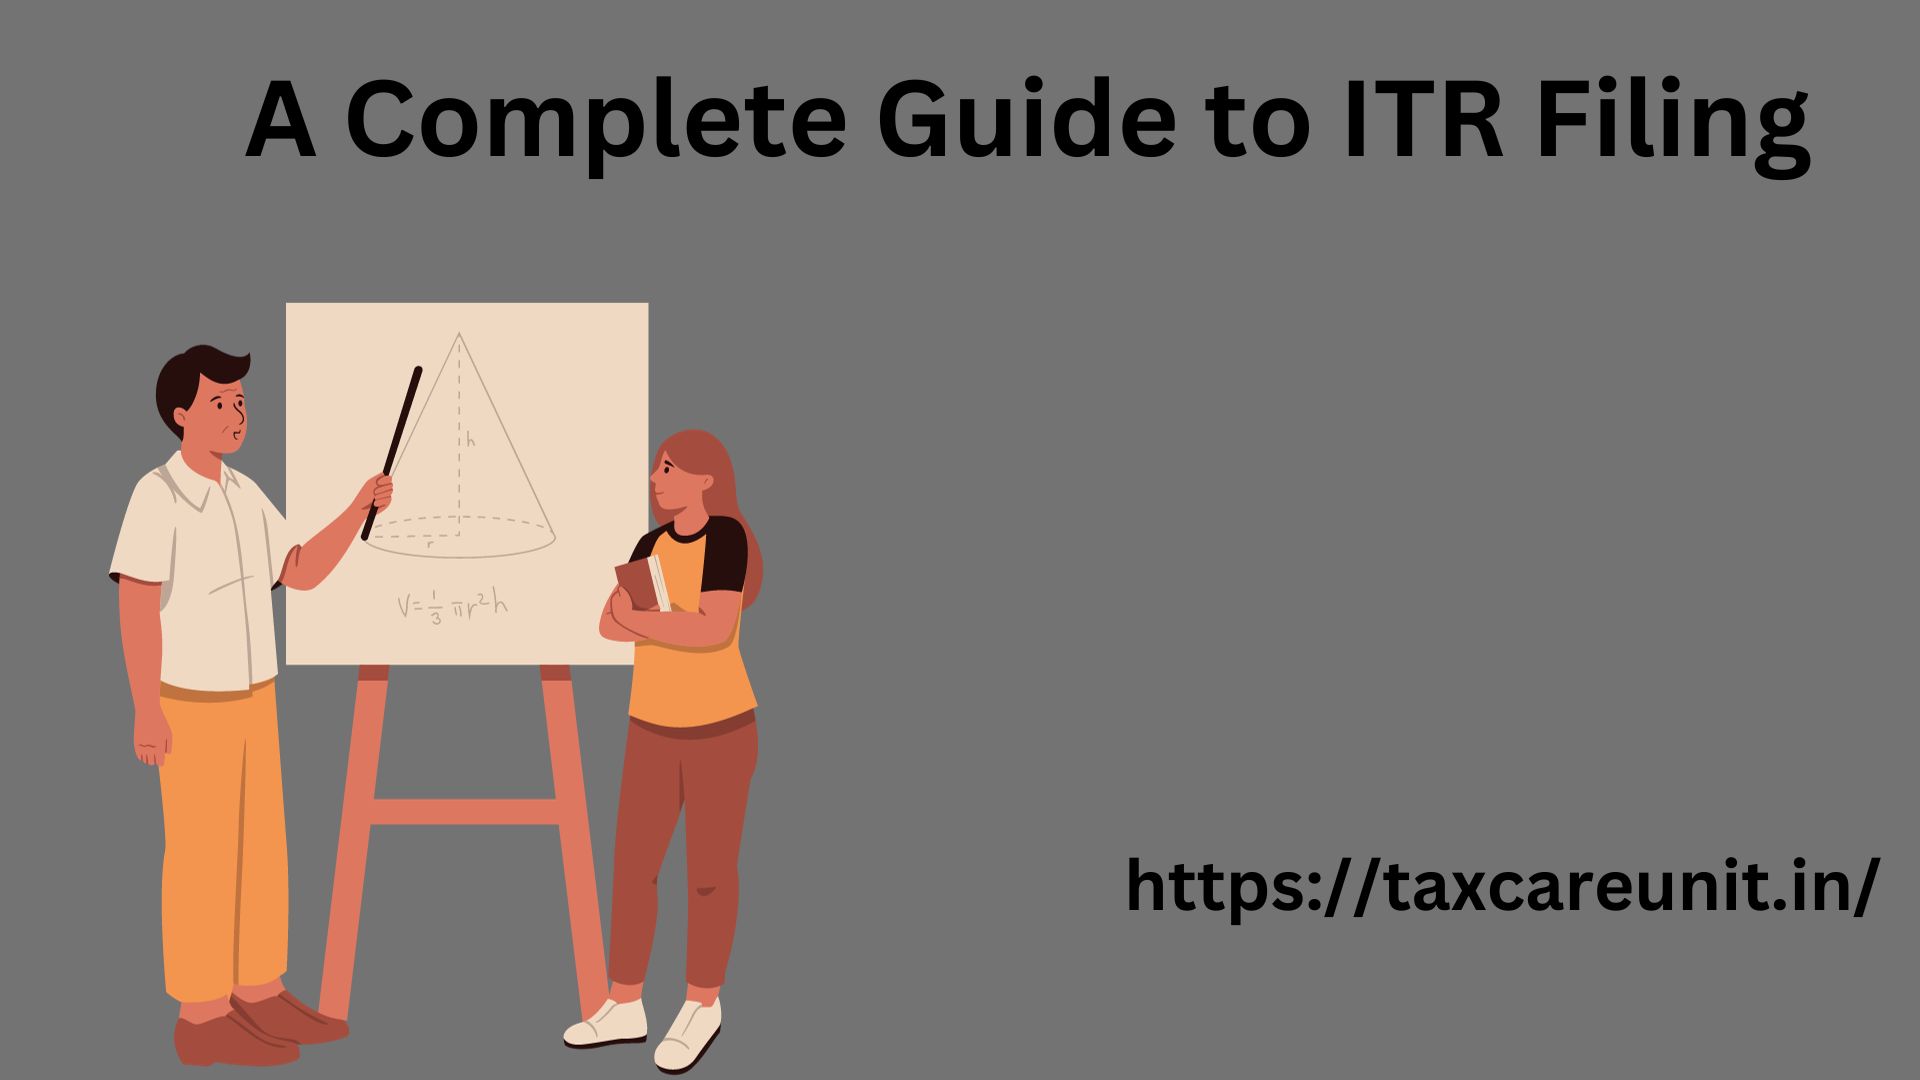 A Complete Guide to ITR Filing